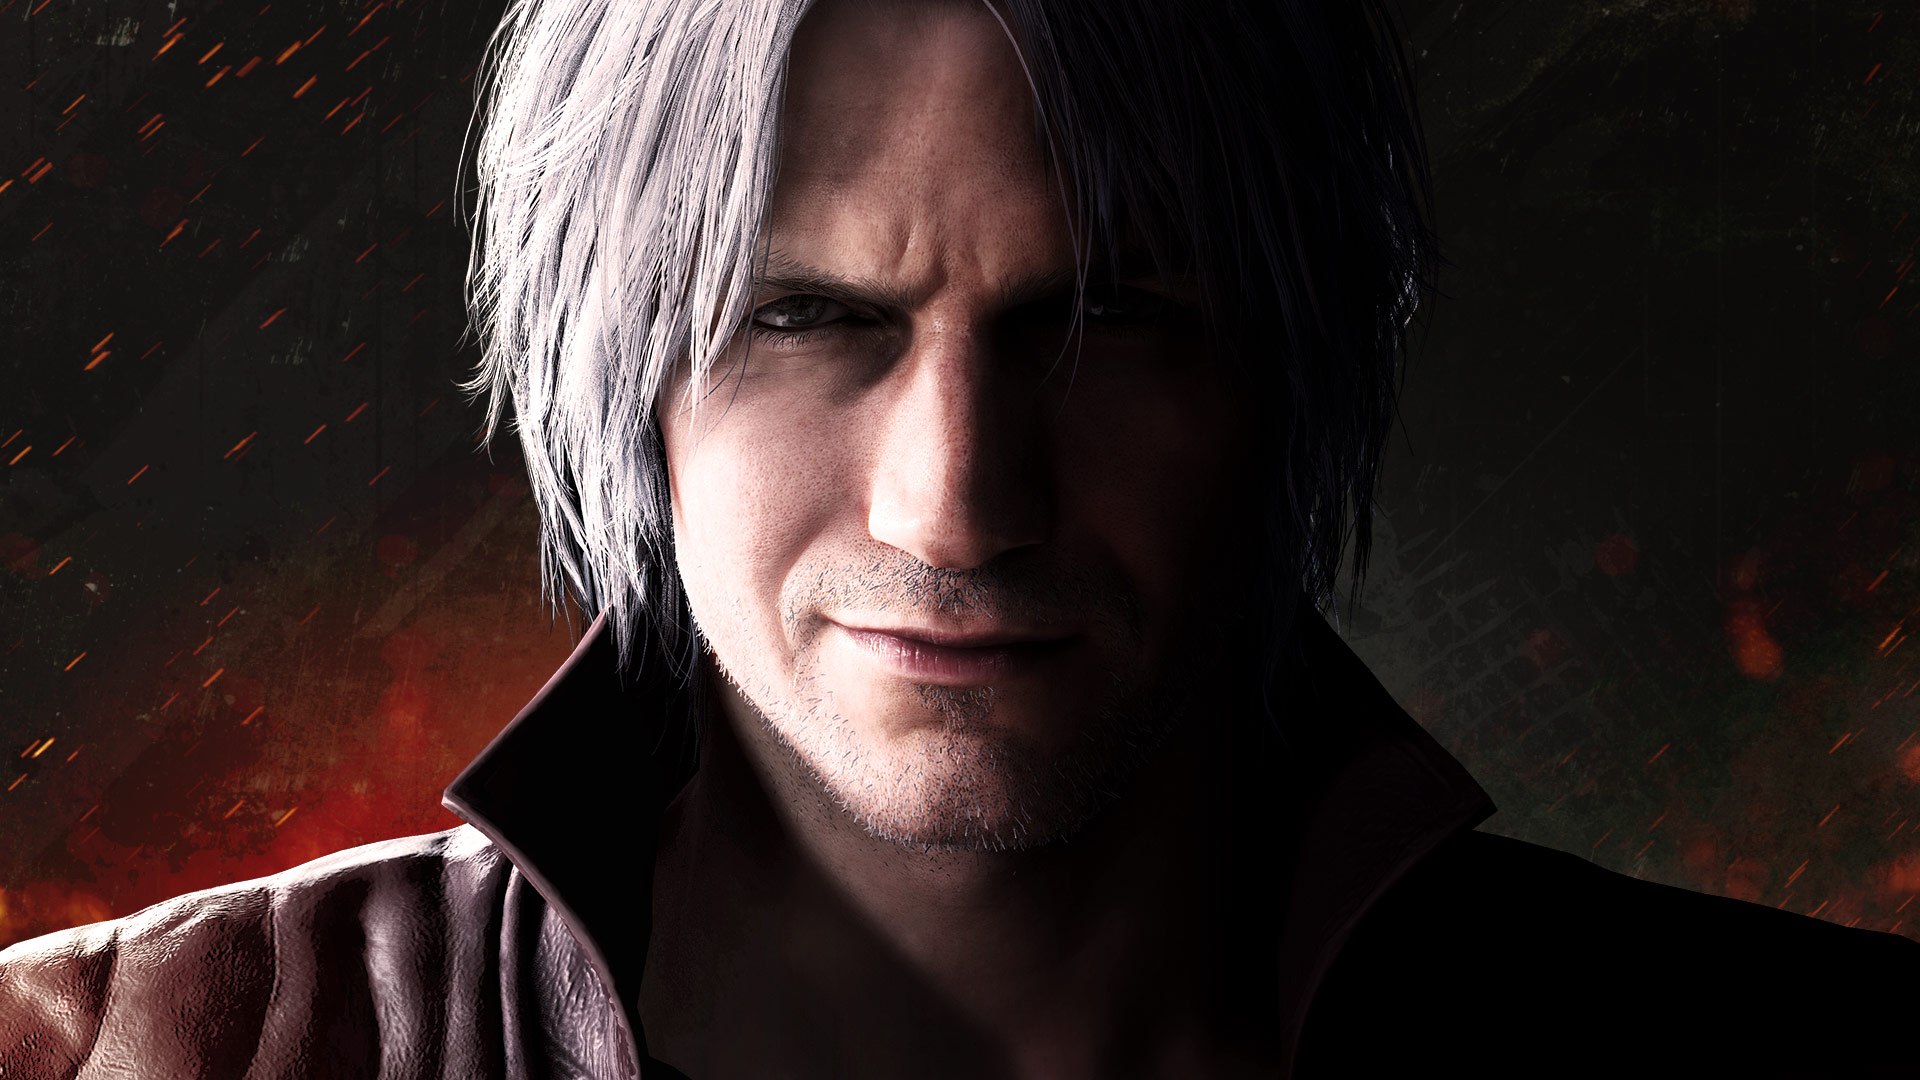 Wallpaper Dante, DMC, Devil May Cry 5, Videogame for mobile and desktop,  section игры, resolution 1920x1080 - download